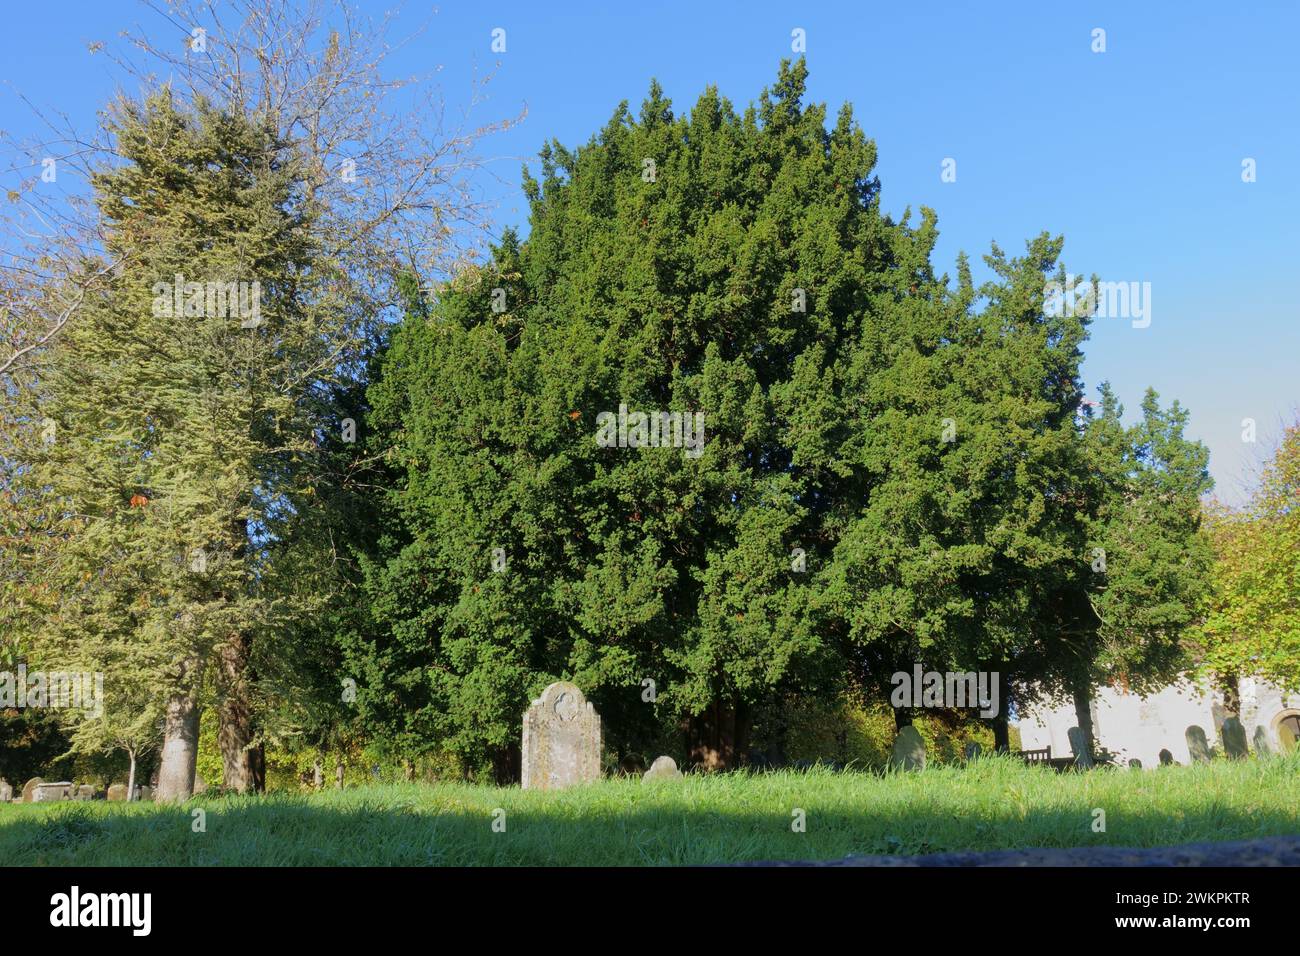 Old yew tree (Taxus baccata) with other trees in an old English country churchyard among the gravestones on a fine autumn day, Berkshire, November Stock Photo